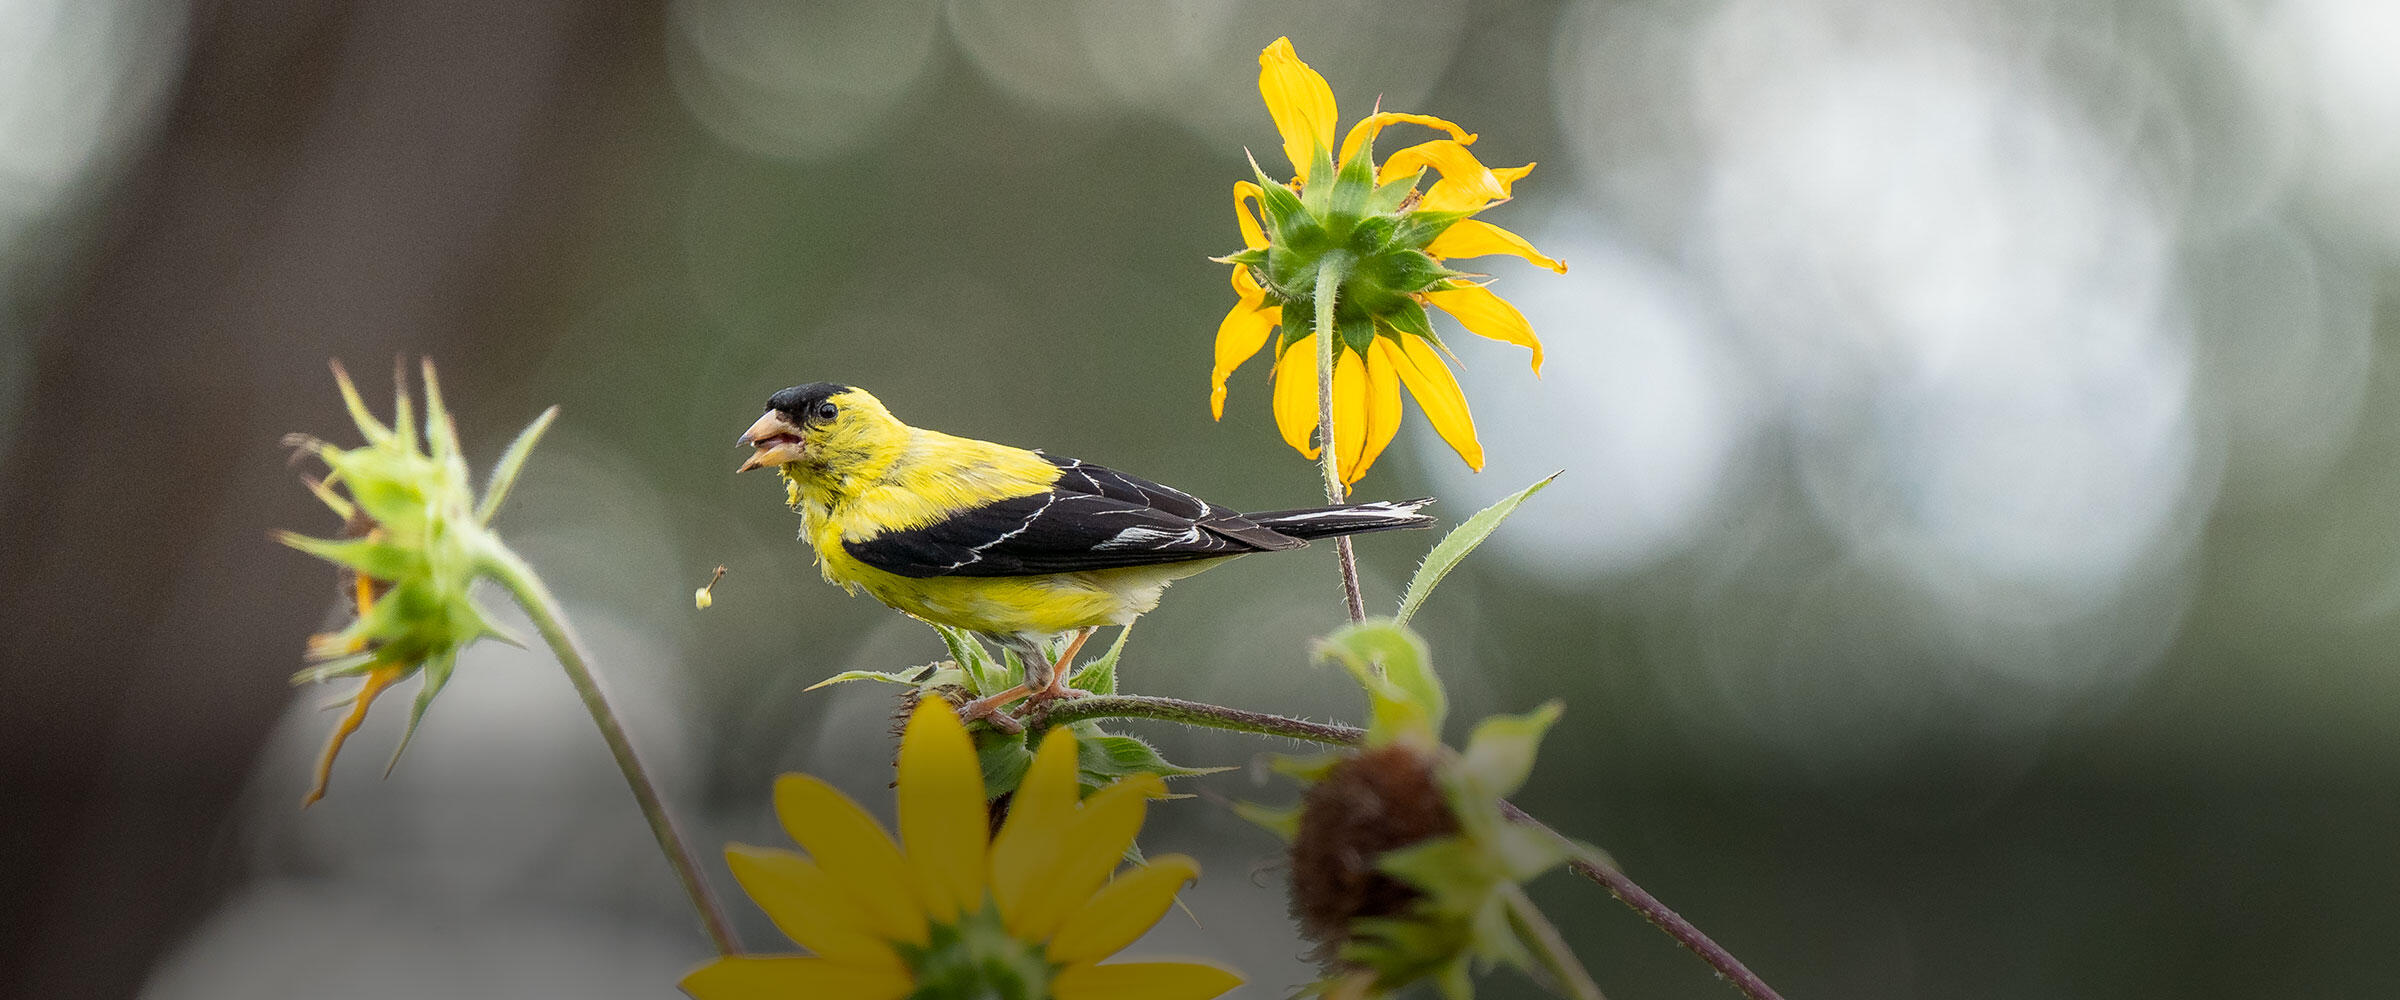 American Goldfinch eats seeds from a sunflower.